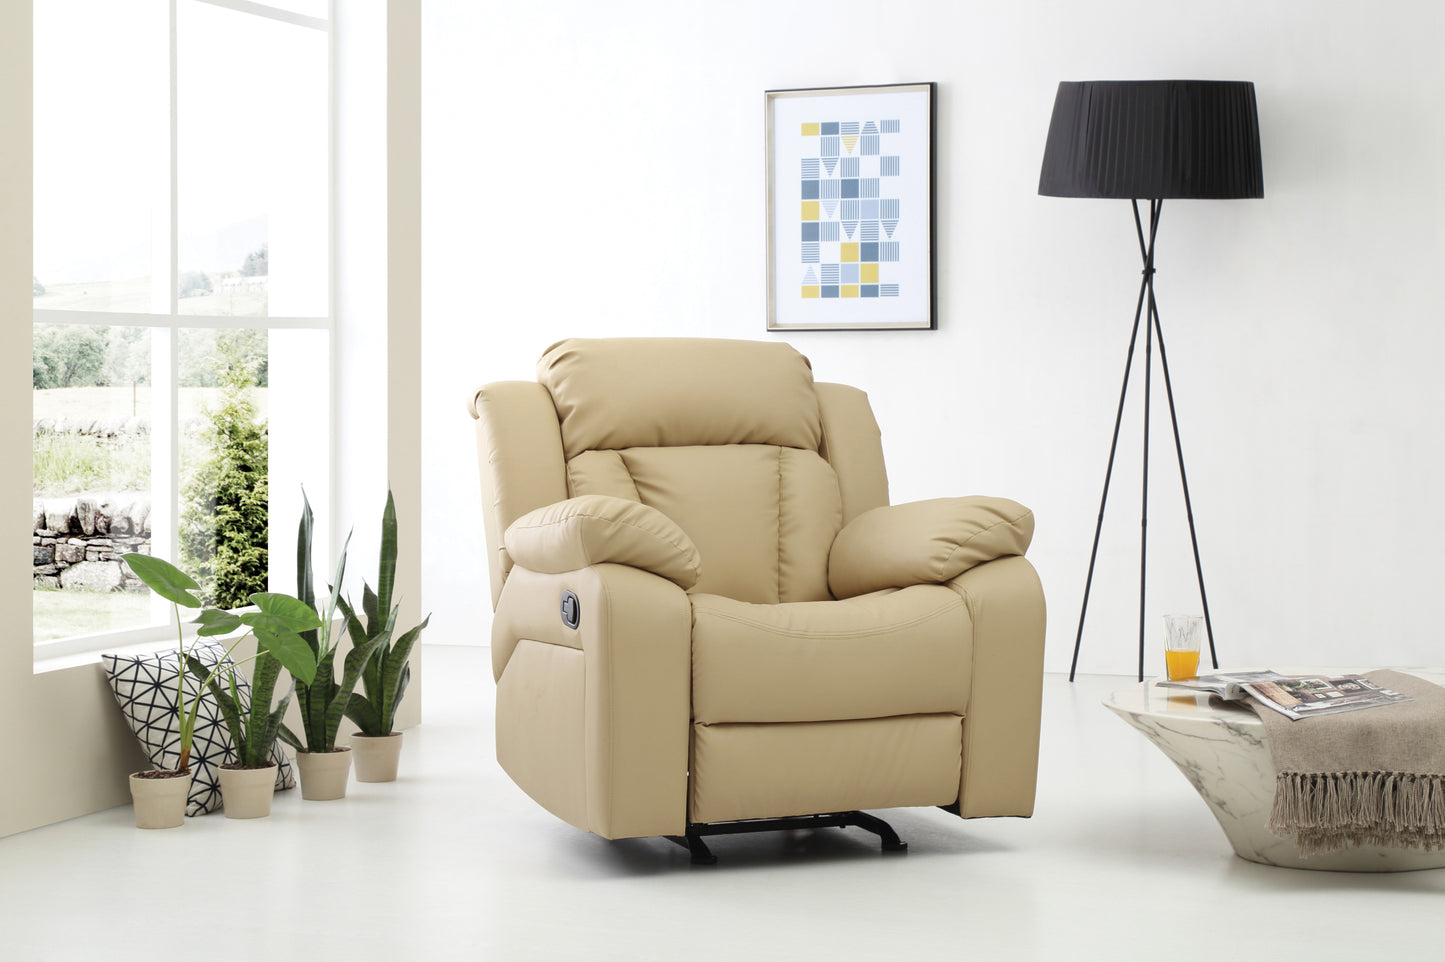 Daria G689-RC Rocker Recliner in Elegant Beige with Smooth Rocking Motion and Foam Filling